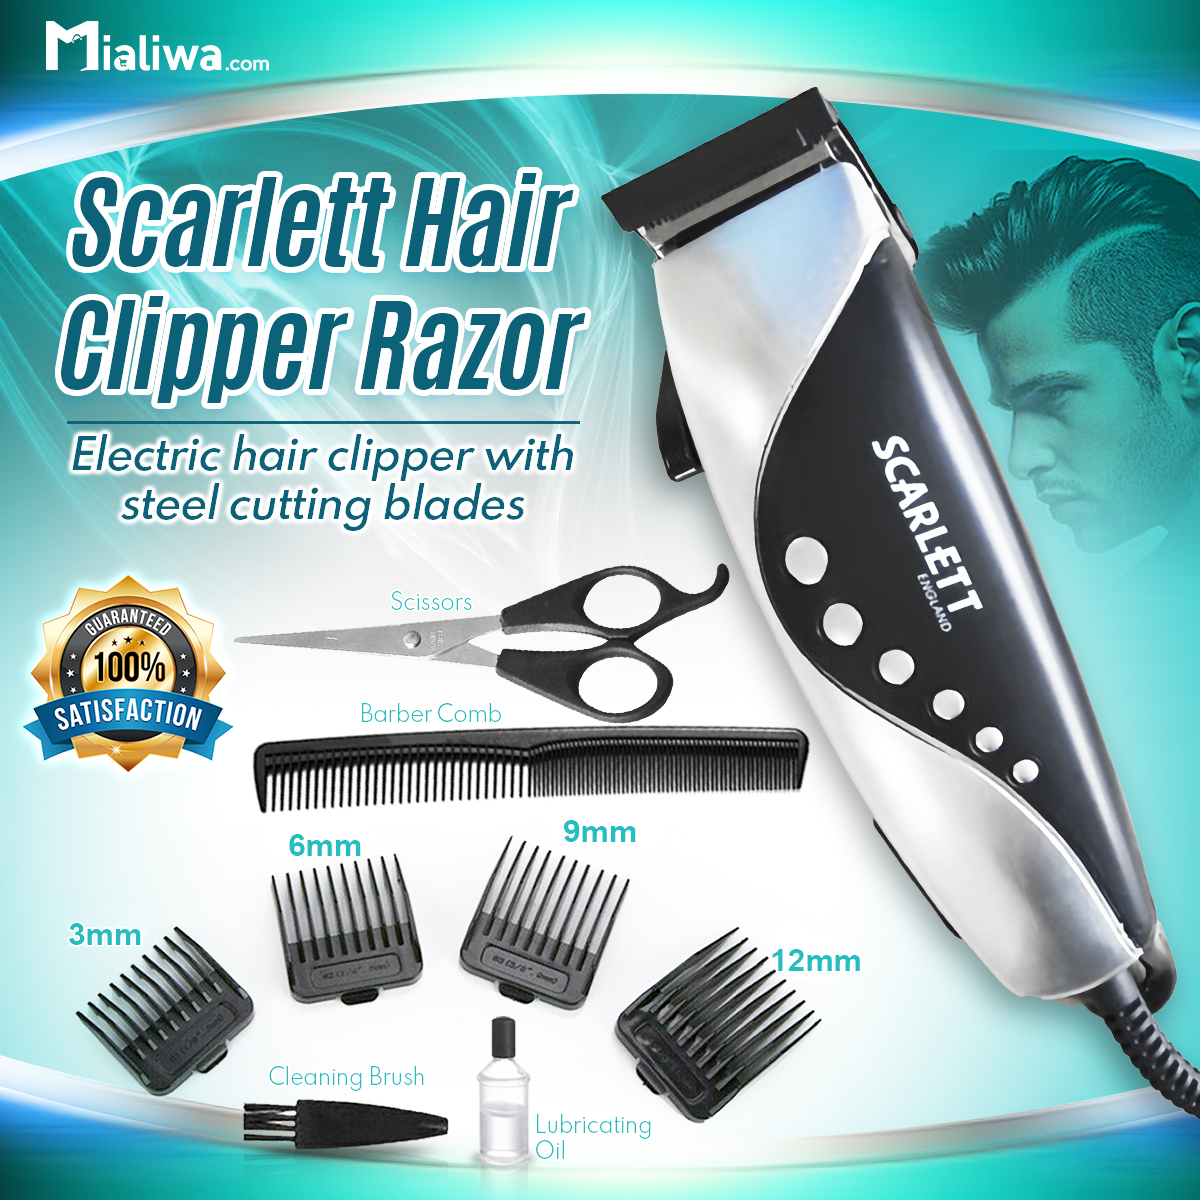 hair trimmer and shaver